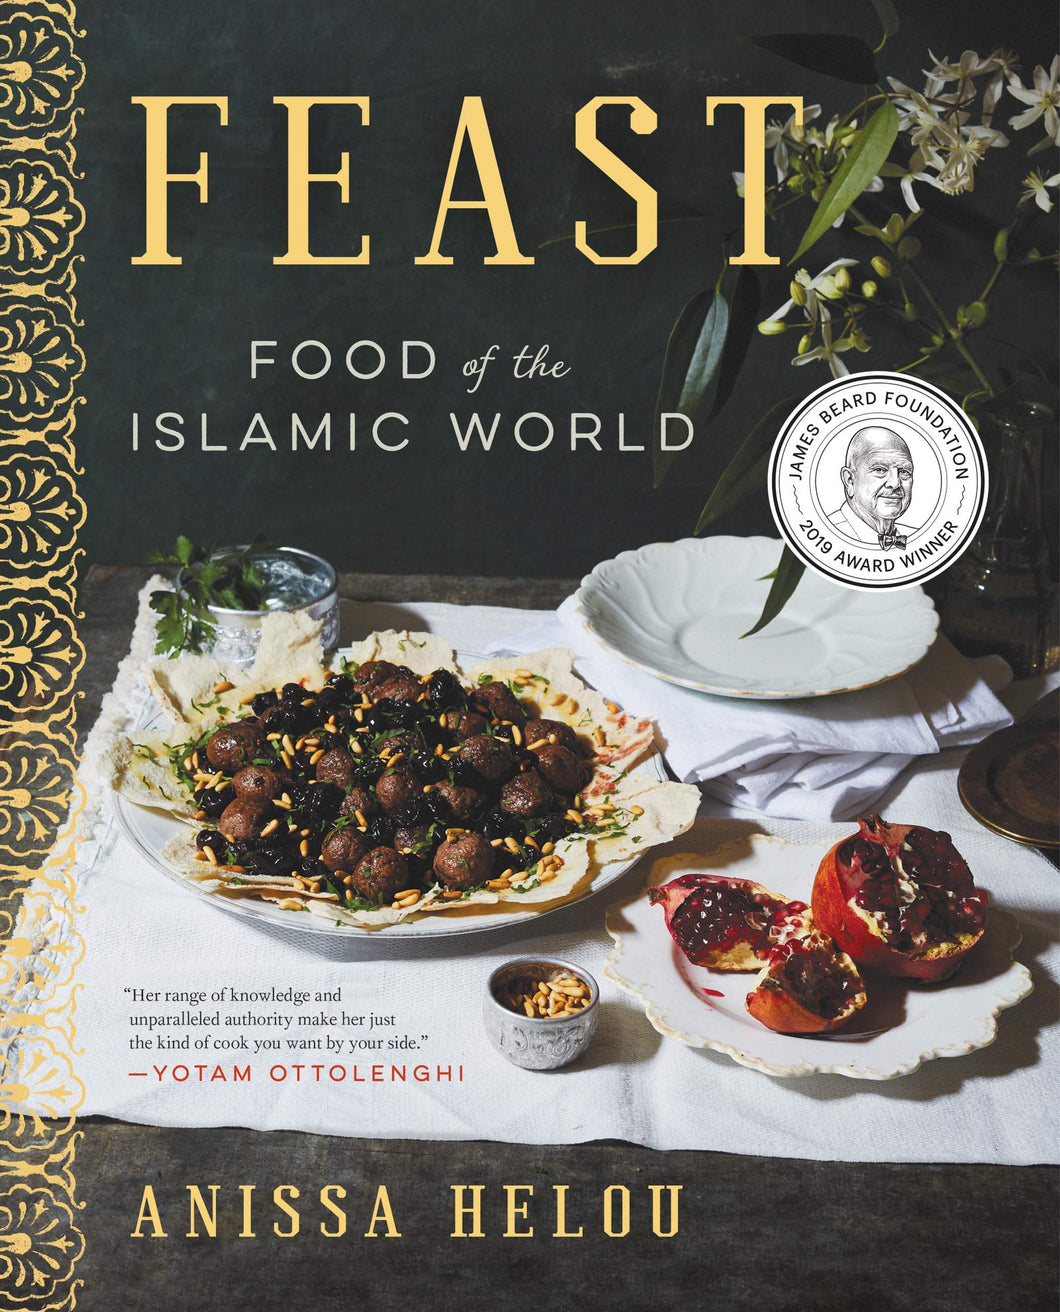 Feast Food of the Islamic World by Anissa Helou